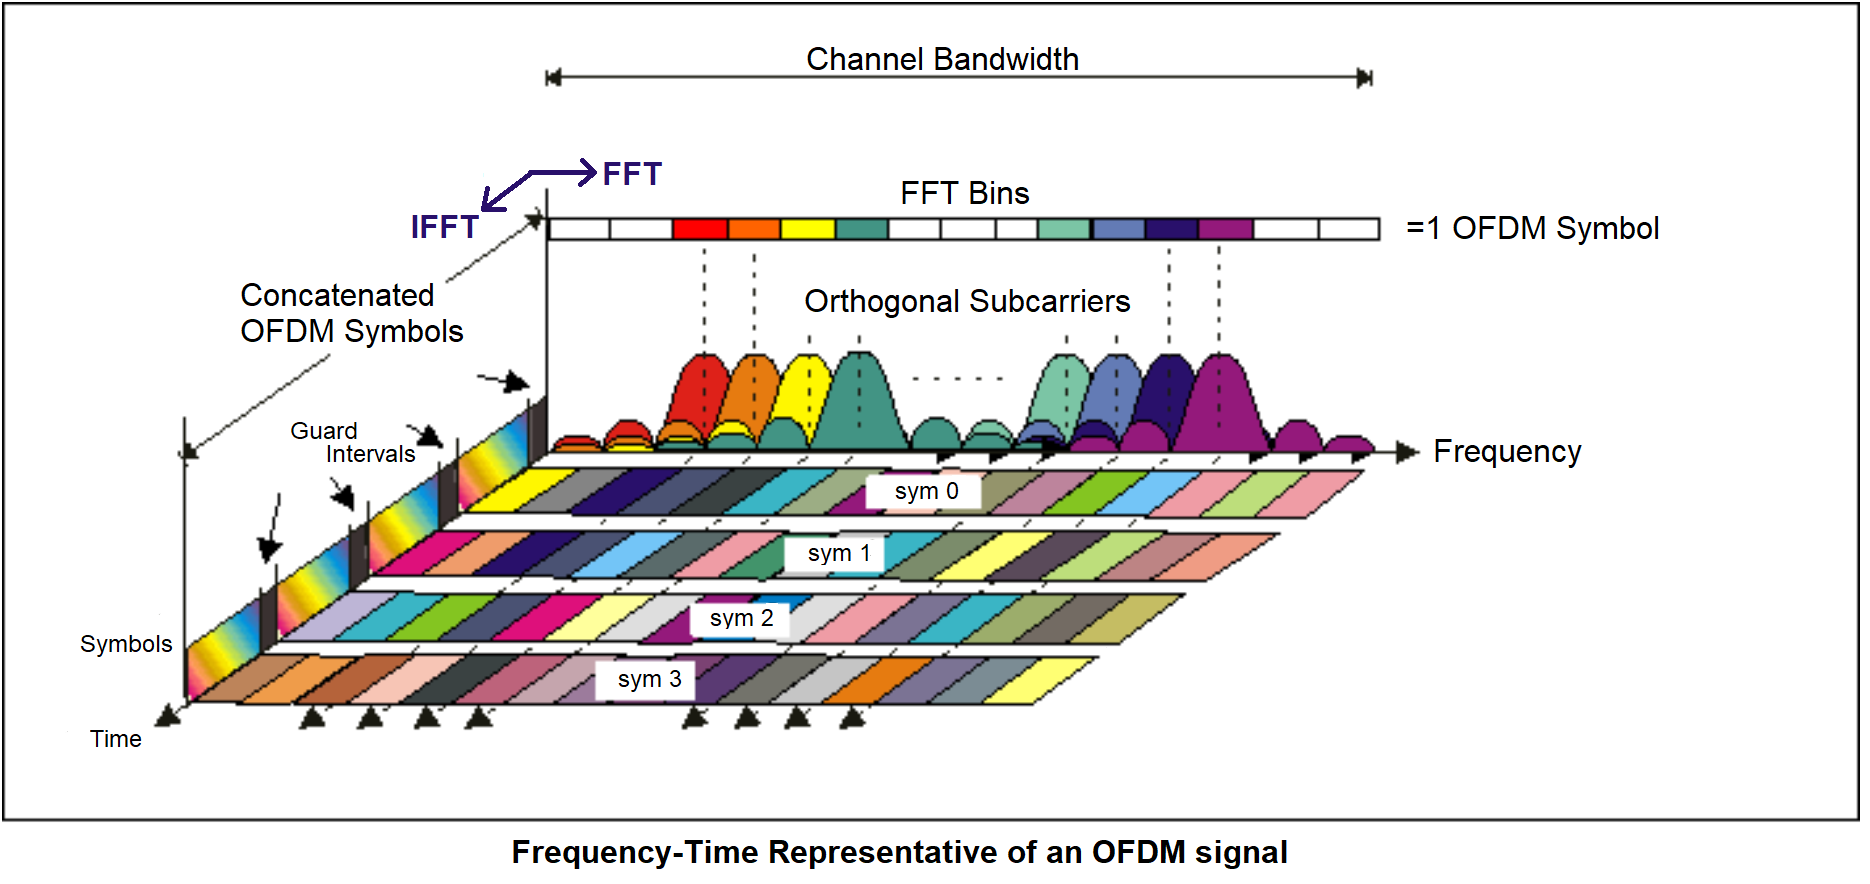 OFDM frequency symbols and time